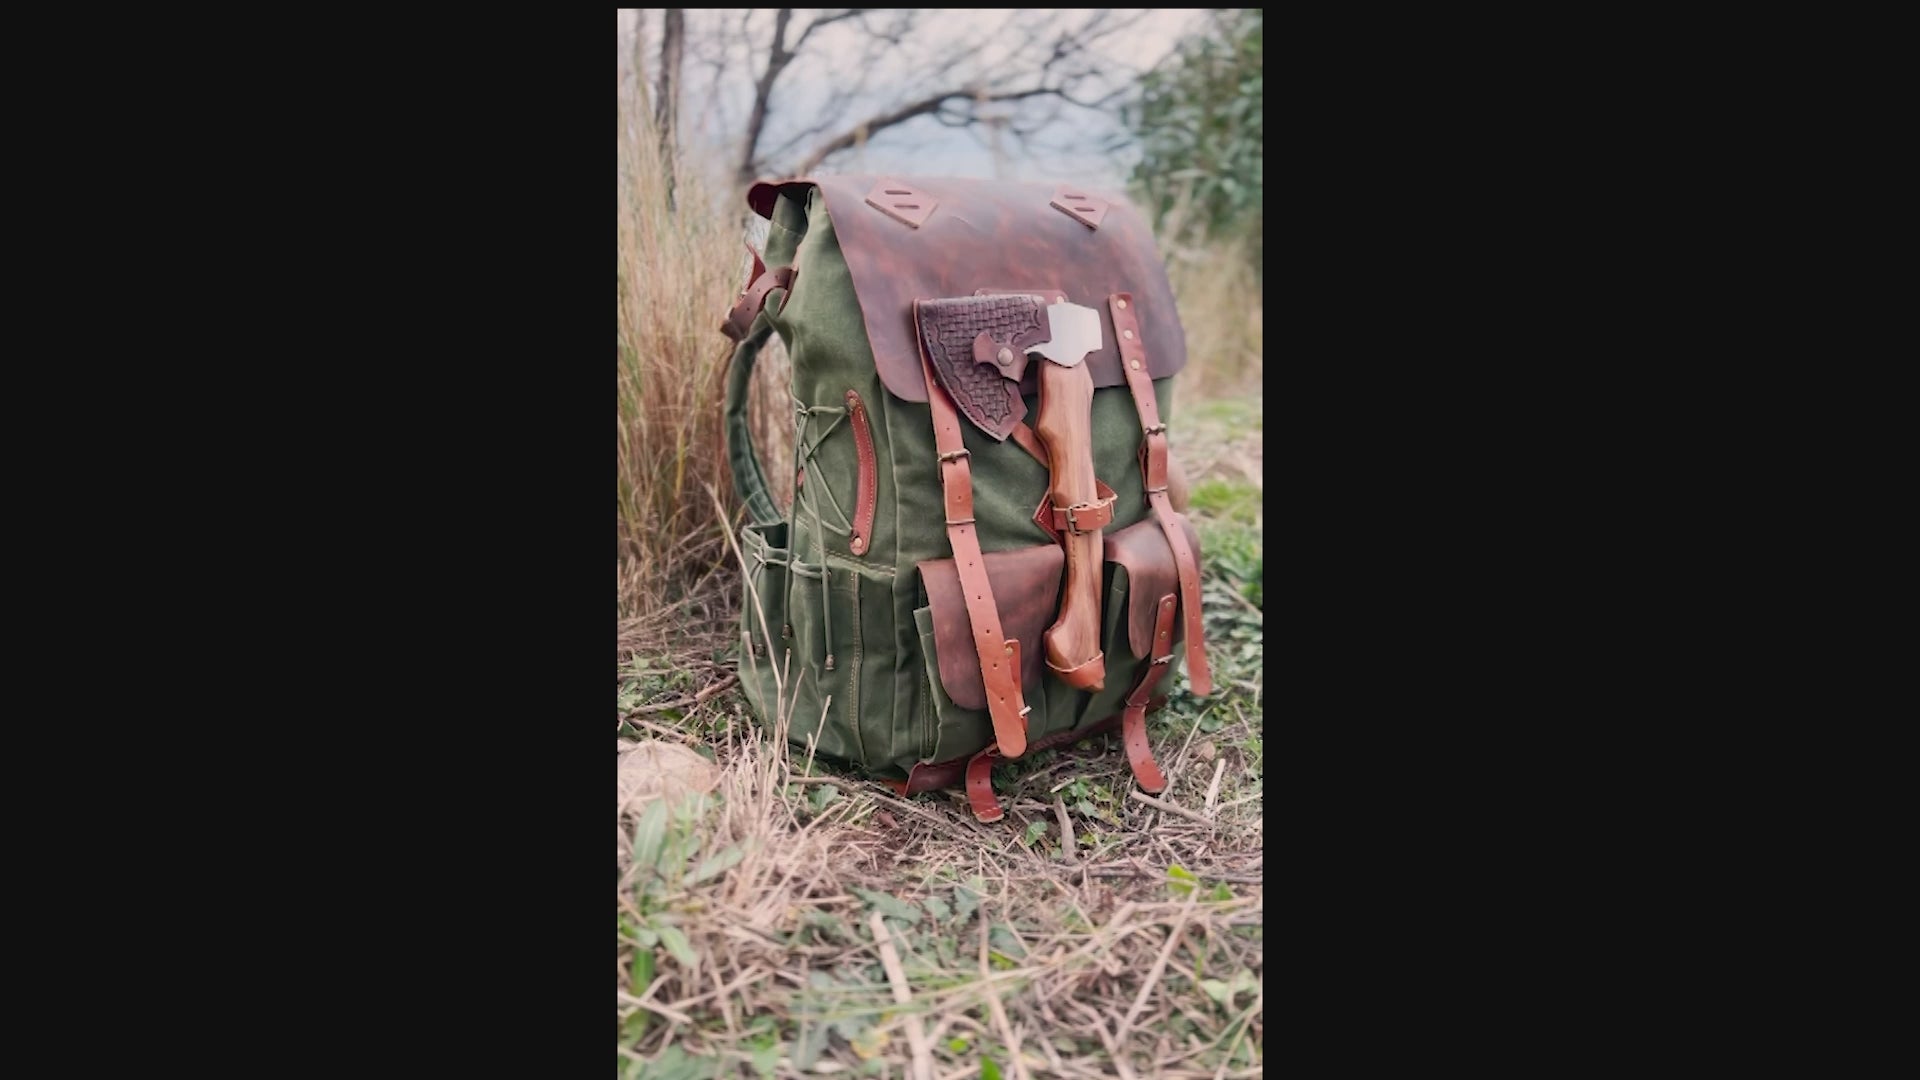 Large Retro Waxed Canvas Leather Backpack 30L